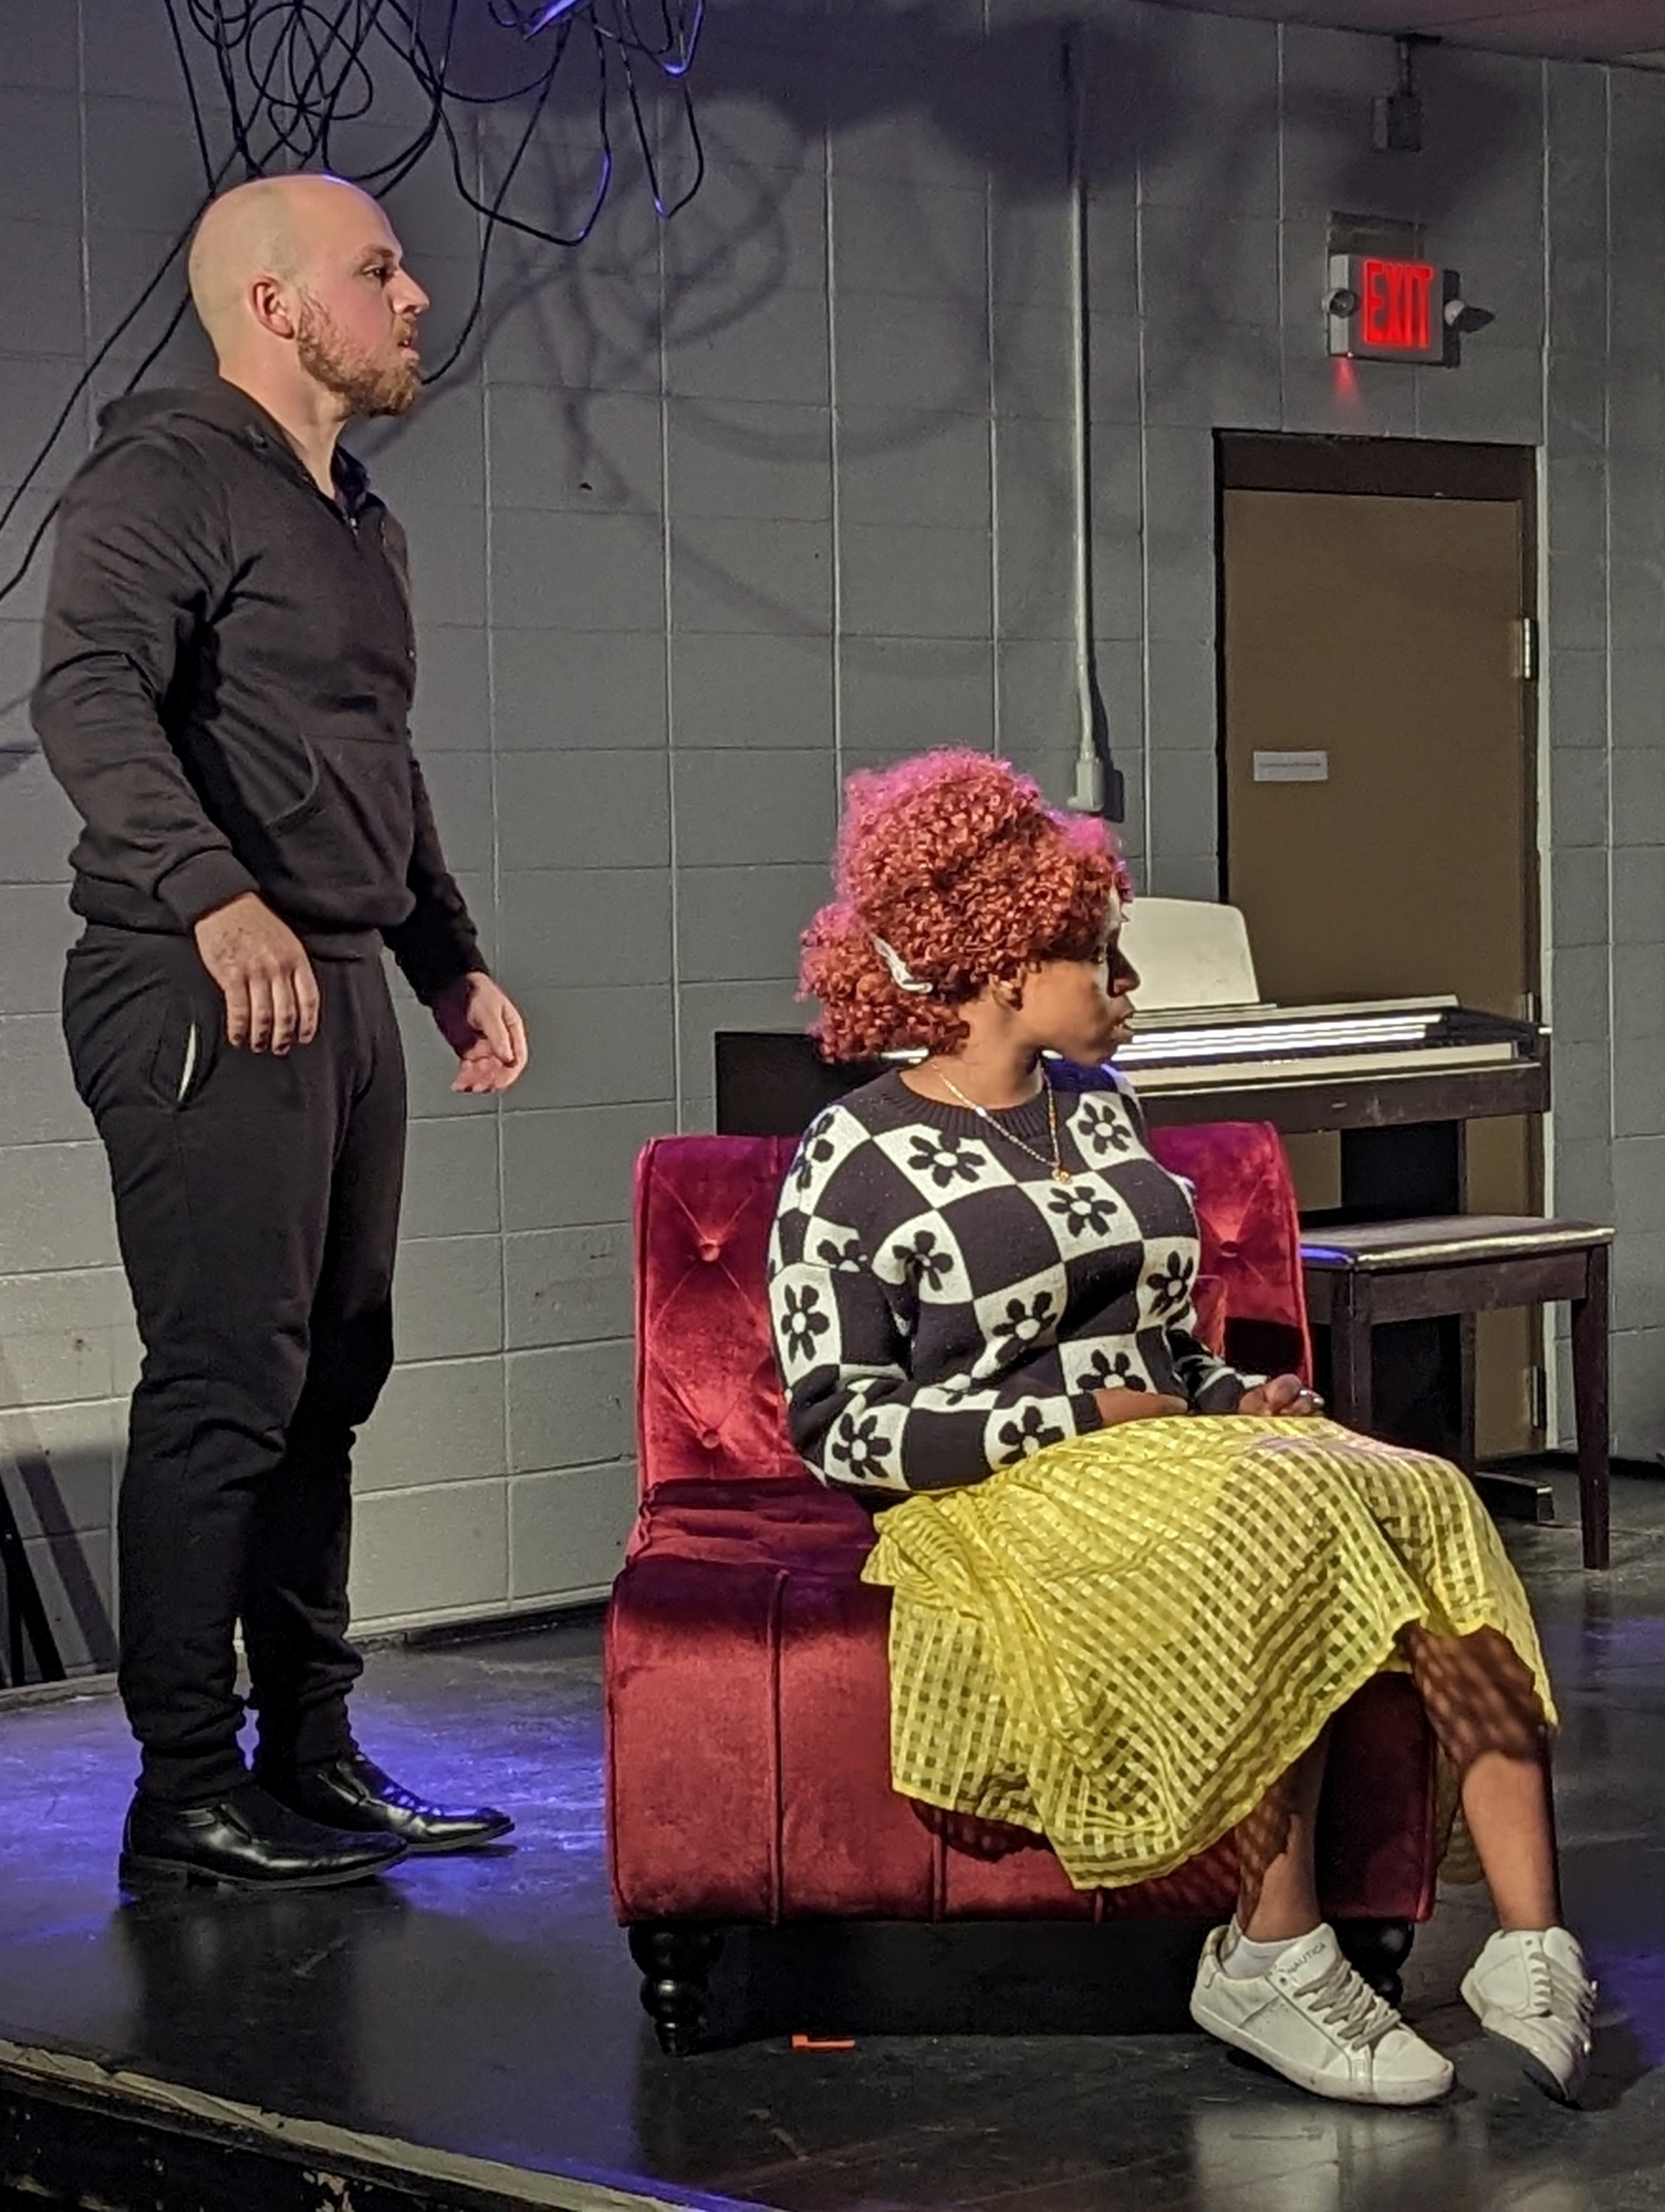 Two actors on a stage rehearse a scene from "Hedda Gabler."